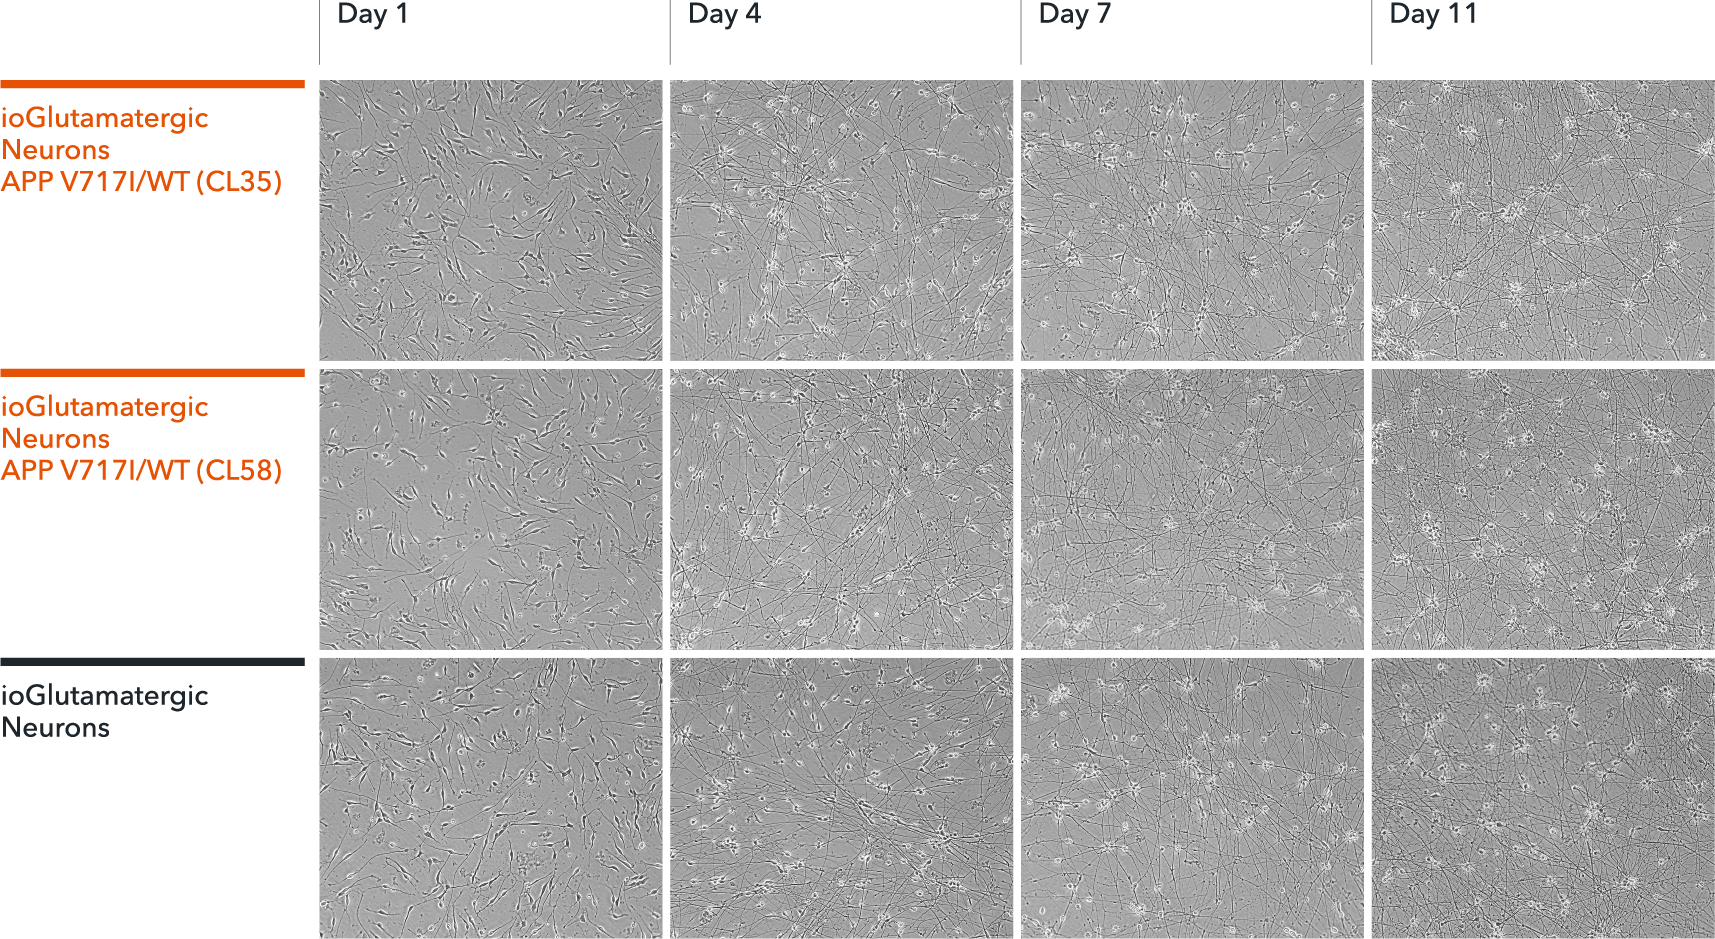 ioGlutamatergic Neurons APP V717I/WT morphology from day1 to 11 post-thaw.